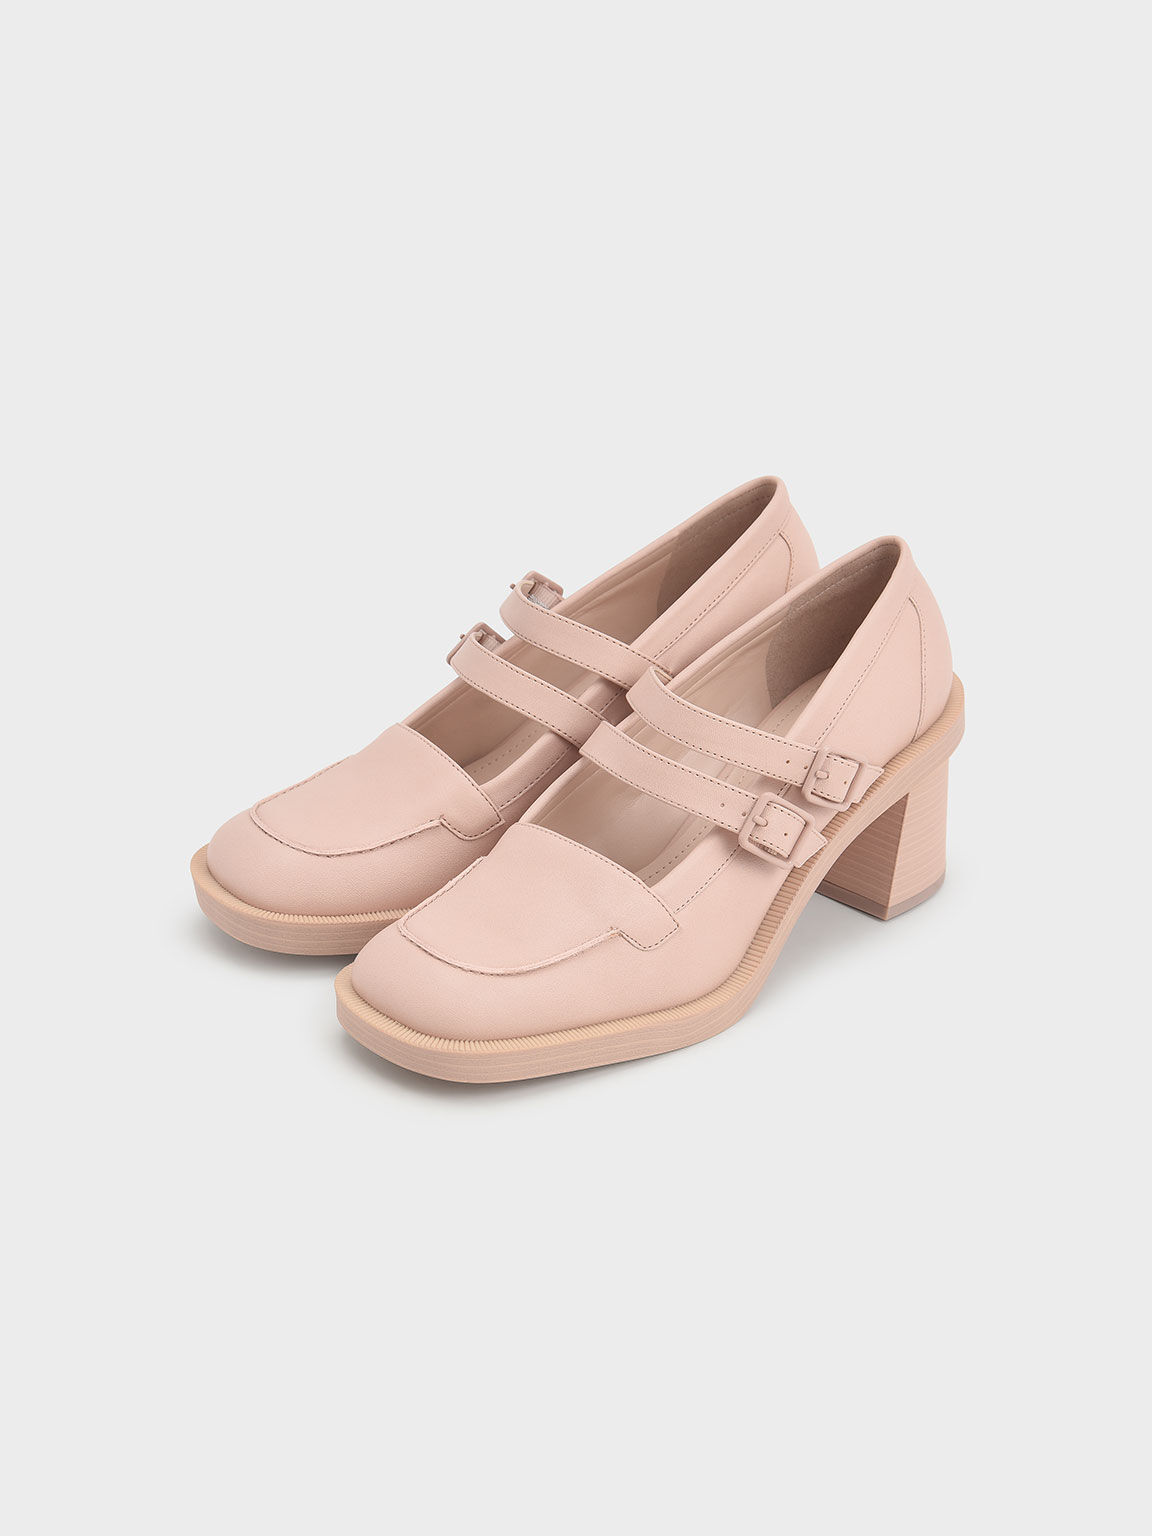 Haisley Double-Strap Mary Jane Pumps, Pink, hi-res